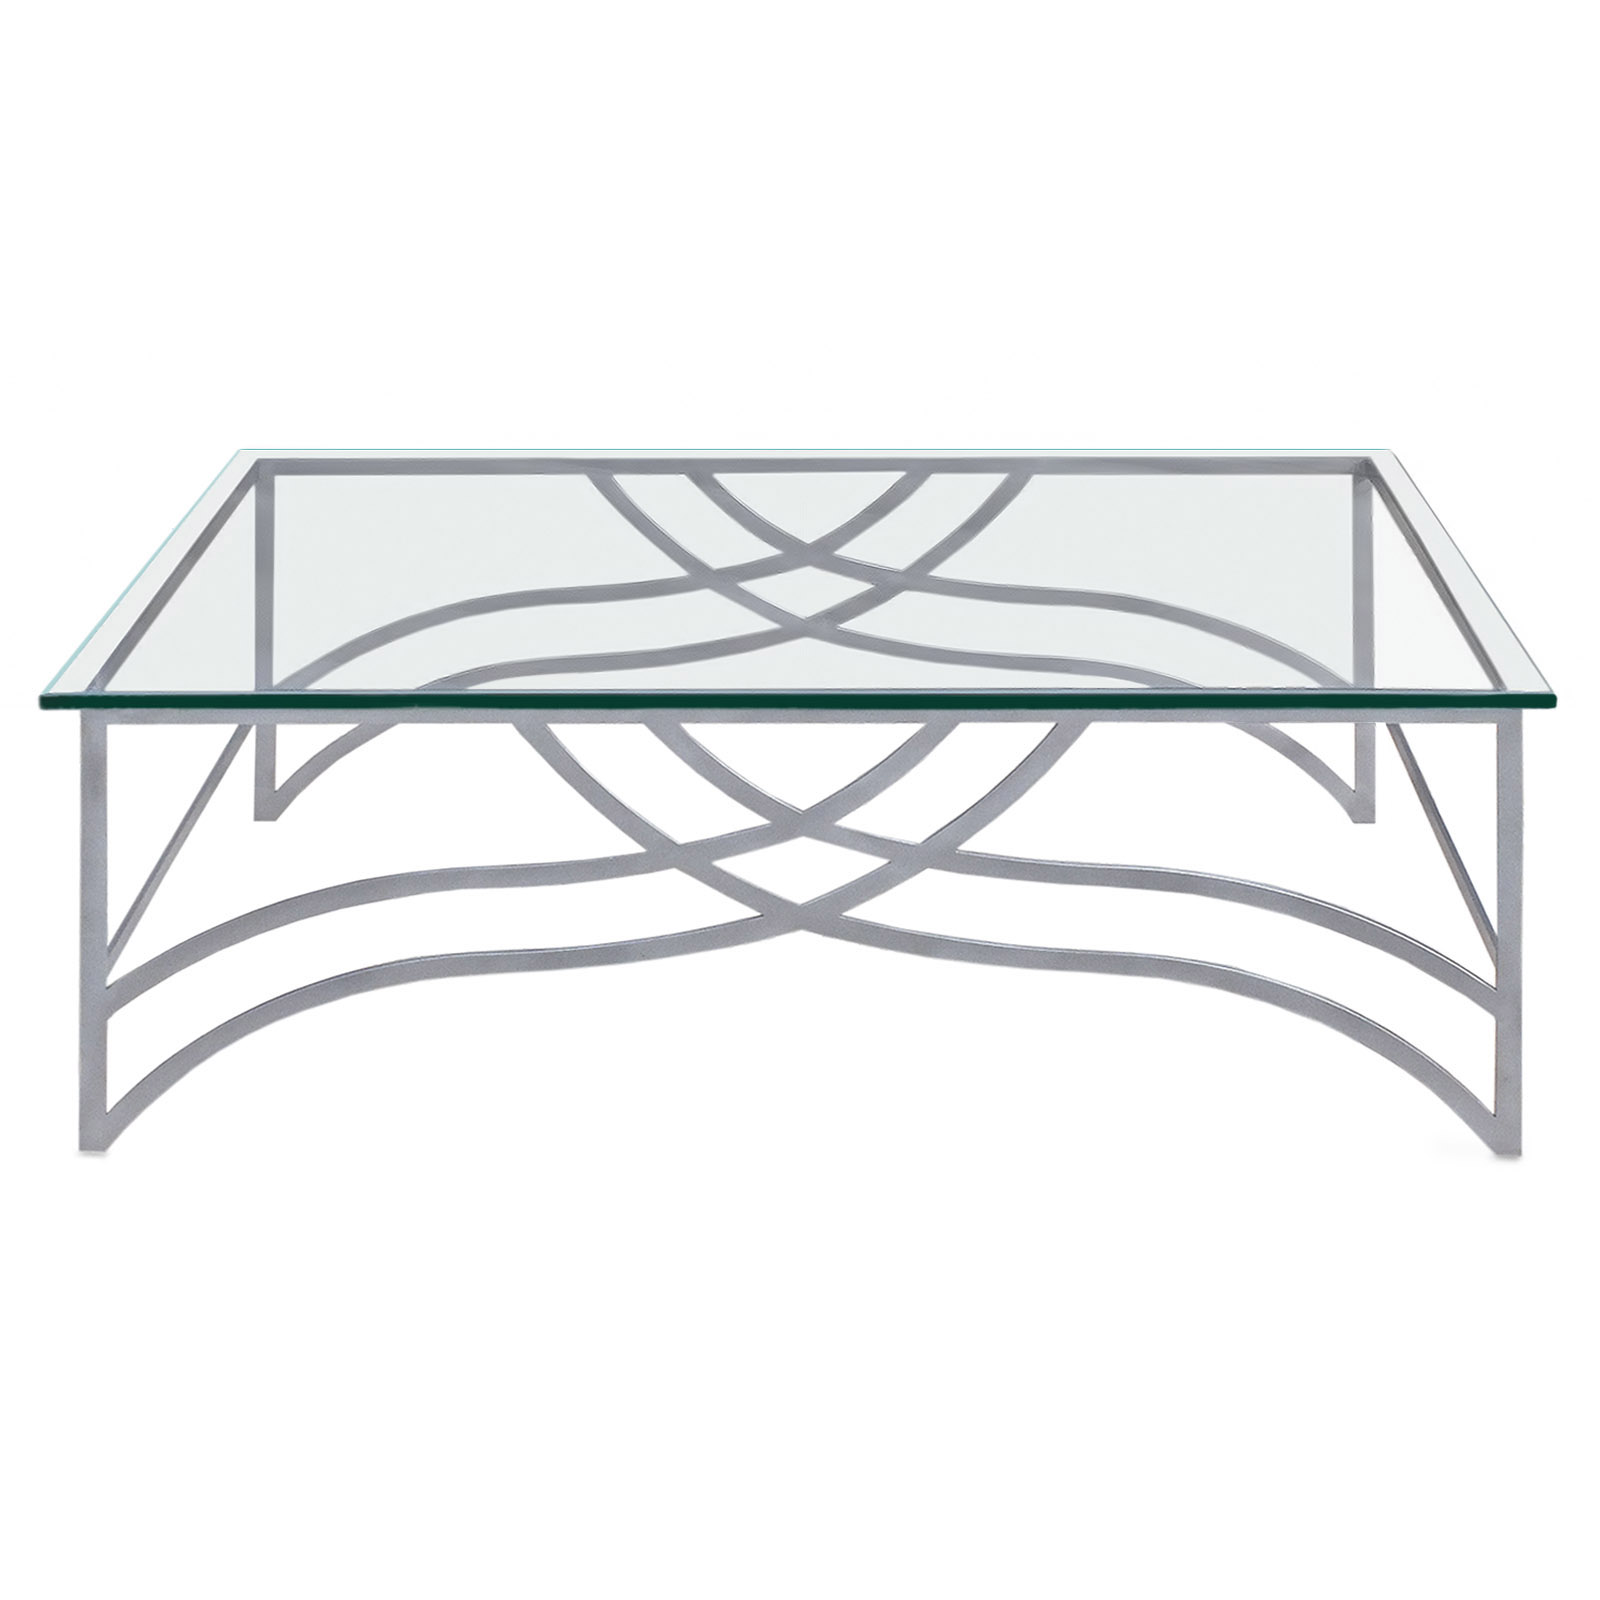 Napier metal coffee table. Made to order by Perceval Designs